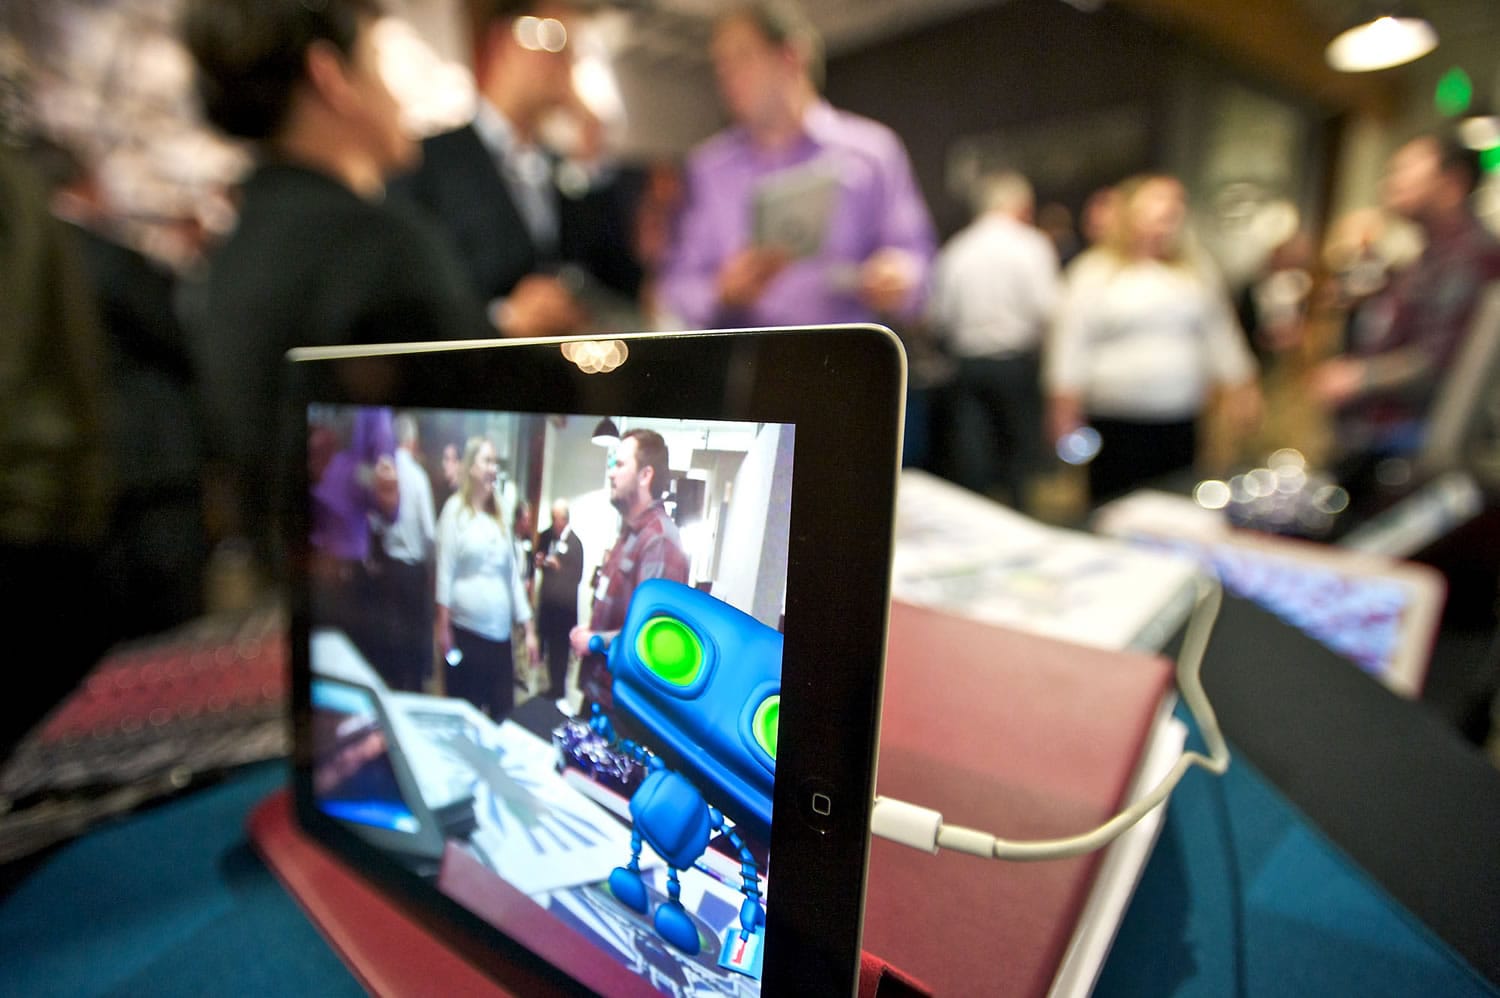 During Thursday evening's &quot;Digital Innovation Showcase,&quot; an iPad displayed an &quot;augmented reality&quot; where a tablet or smartphone reads a 2D image and creates a 3D environment.